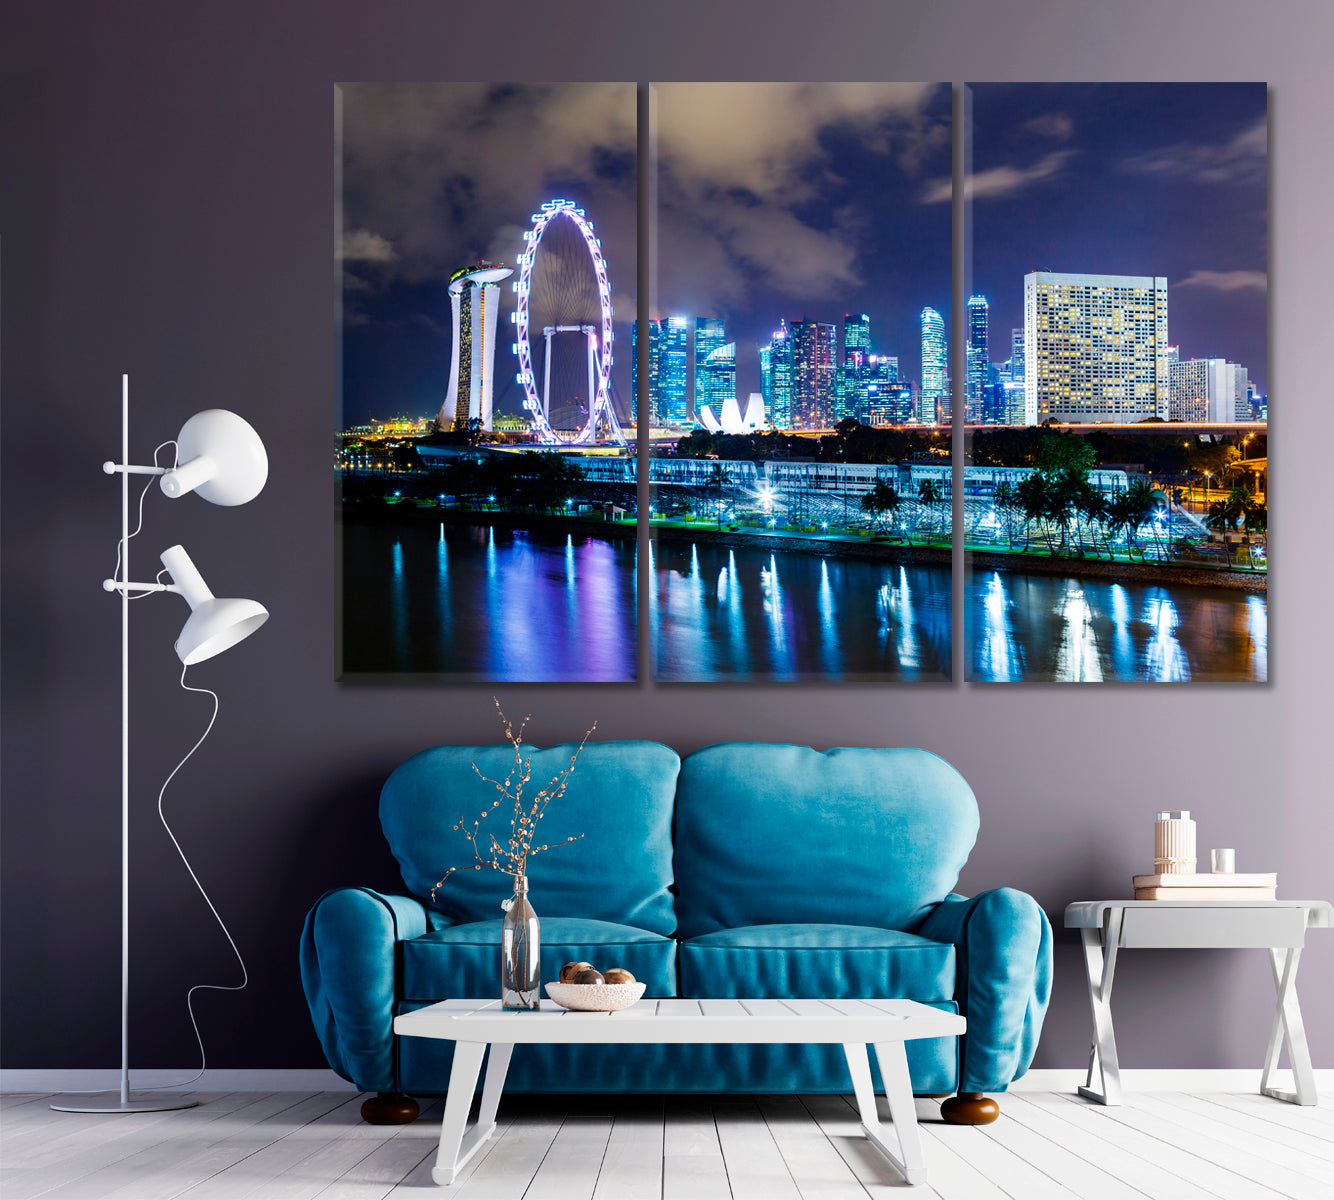 Singapore City Skyline at Night Canvas Print ArtLexy 3 Panels 36"x24" inches 